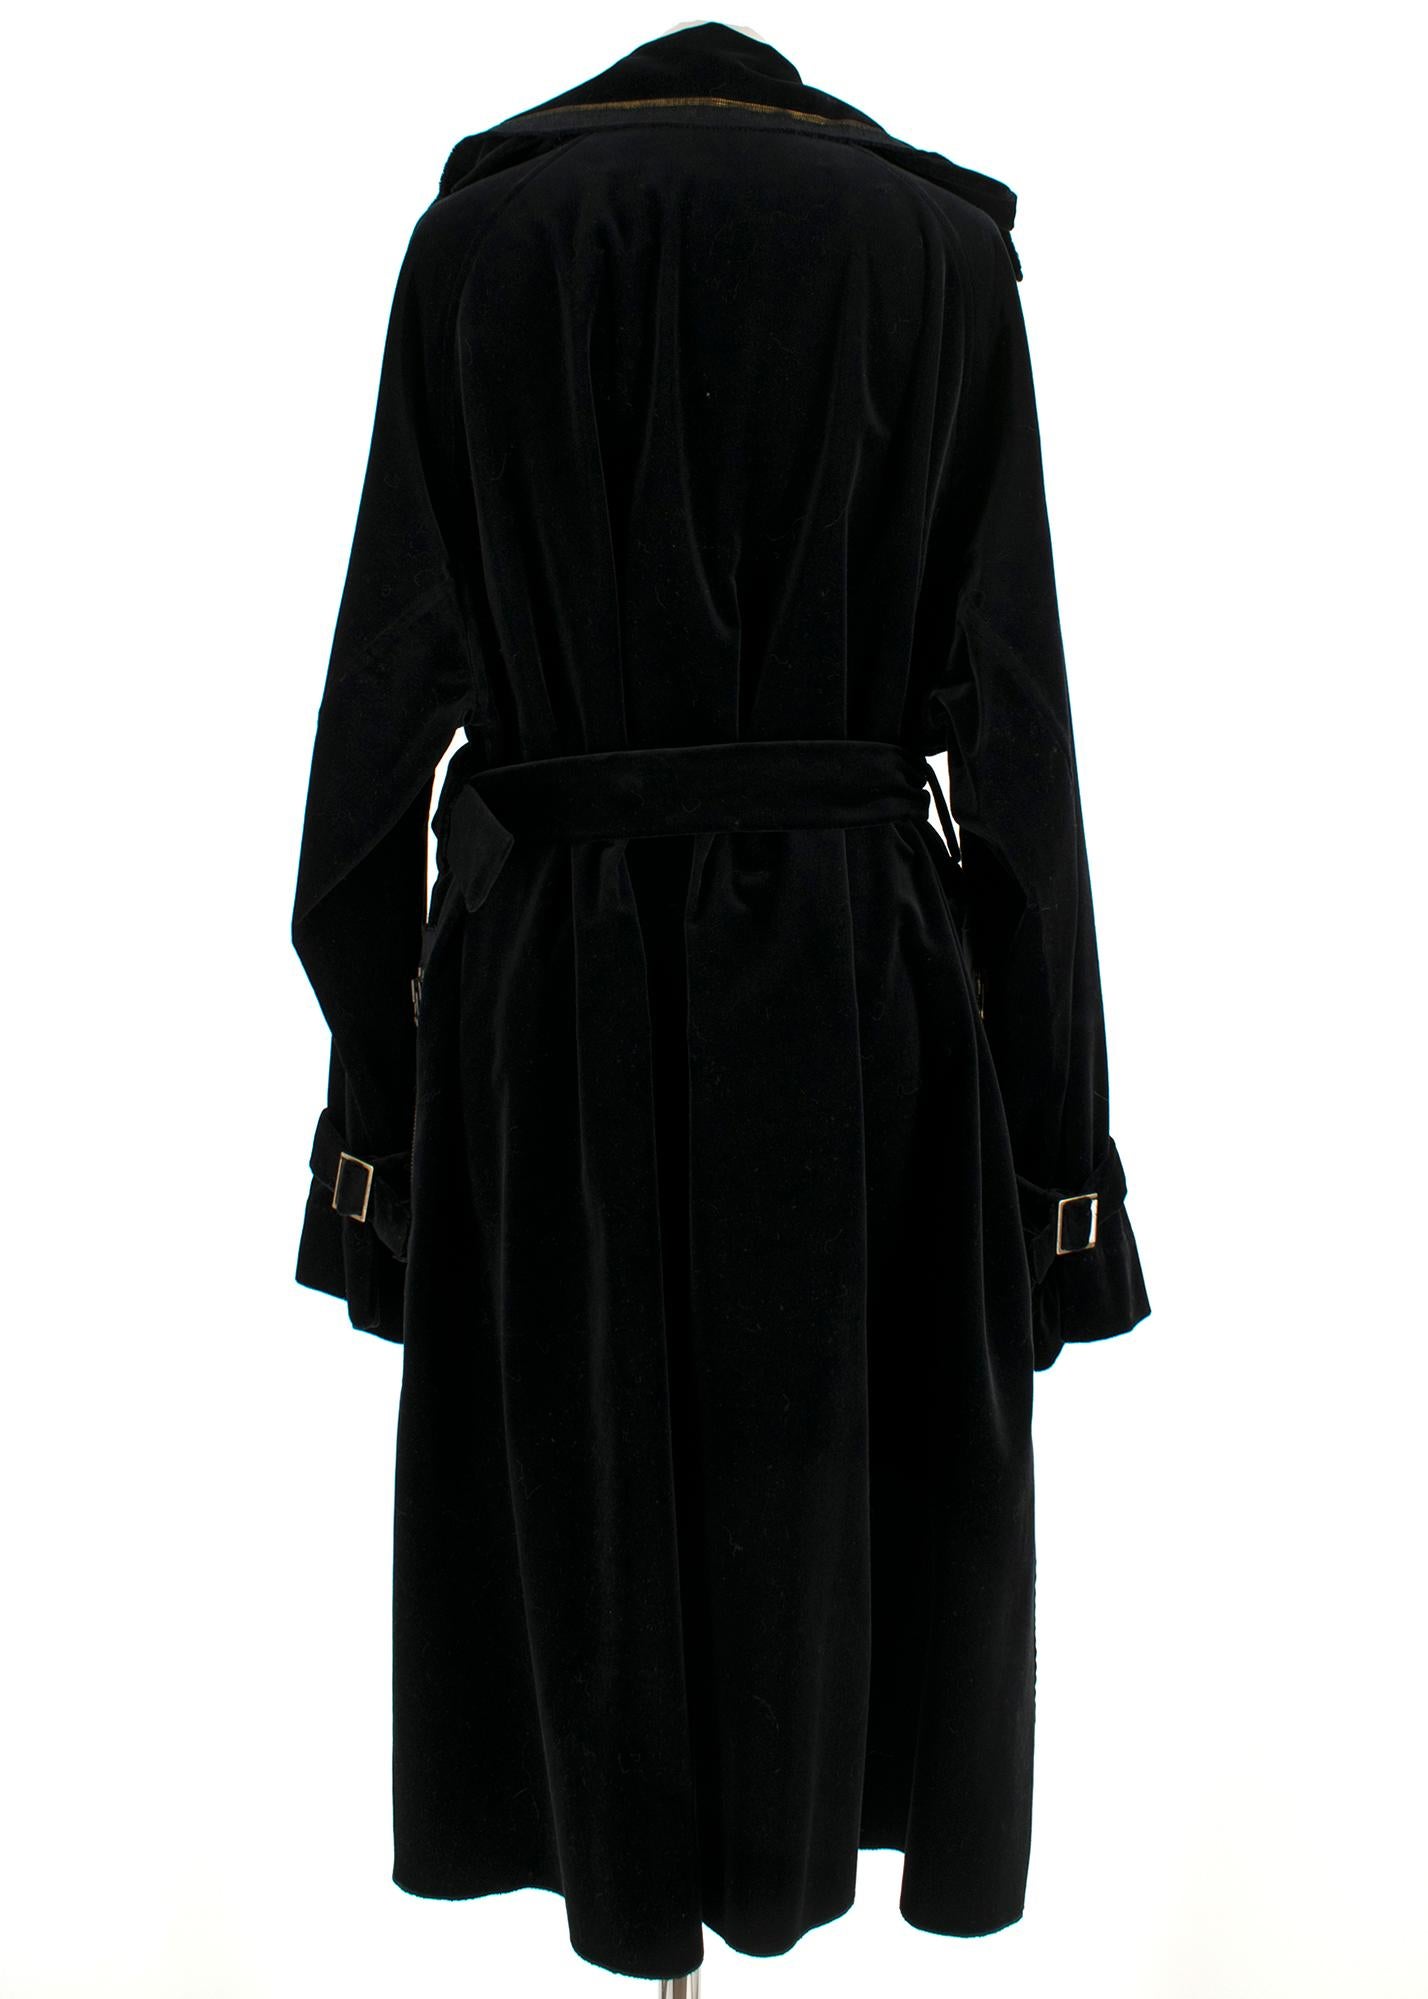 Lanvin Black Longline Wrap Coat - Size US 10 In Excellent Condition For Sale In London, GB